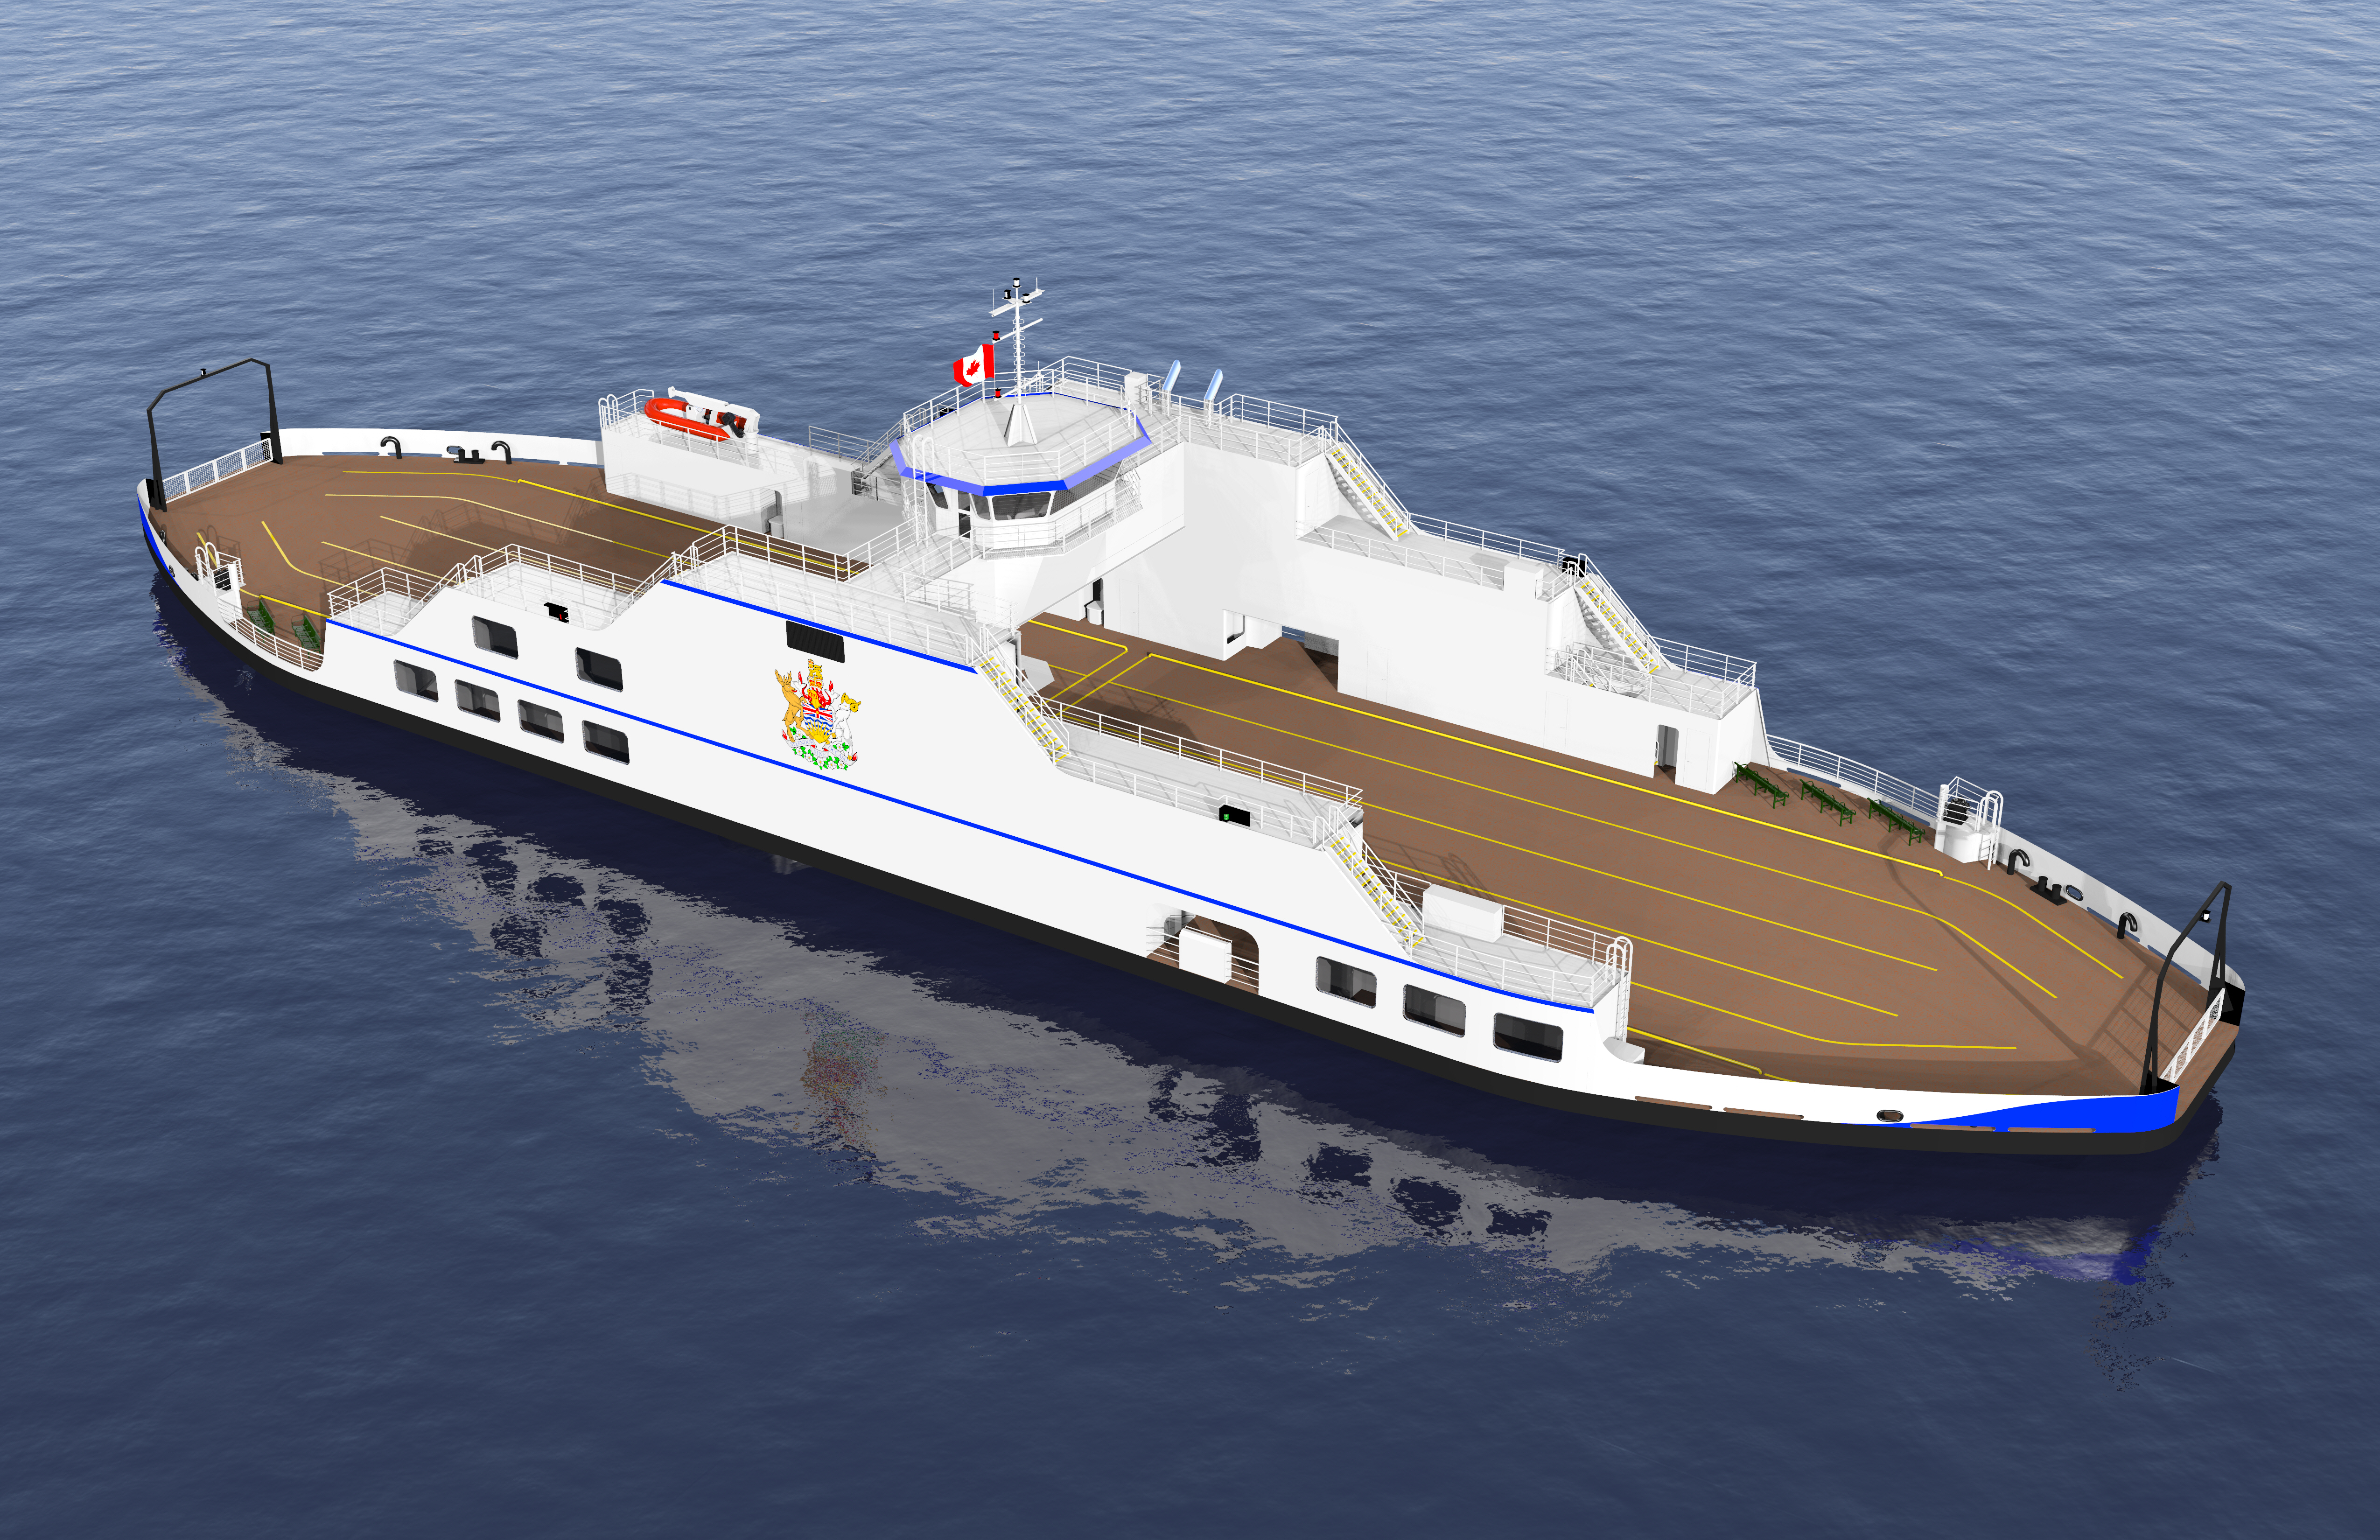 Artist's rendering of the new Kootenay Lake ferry